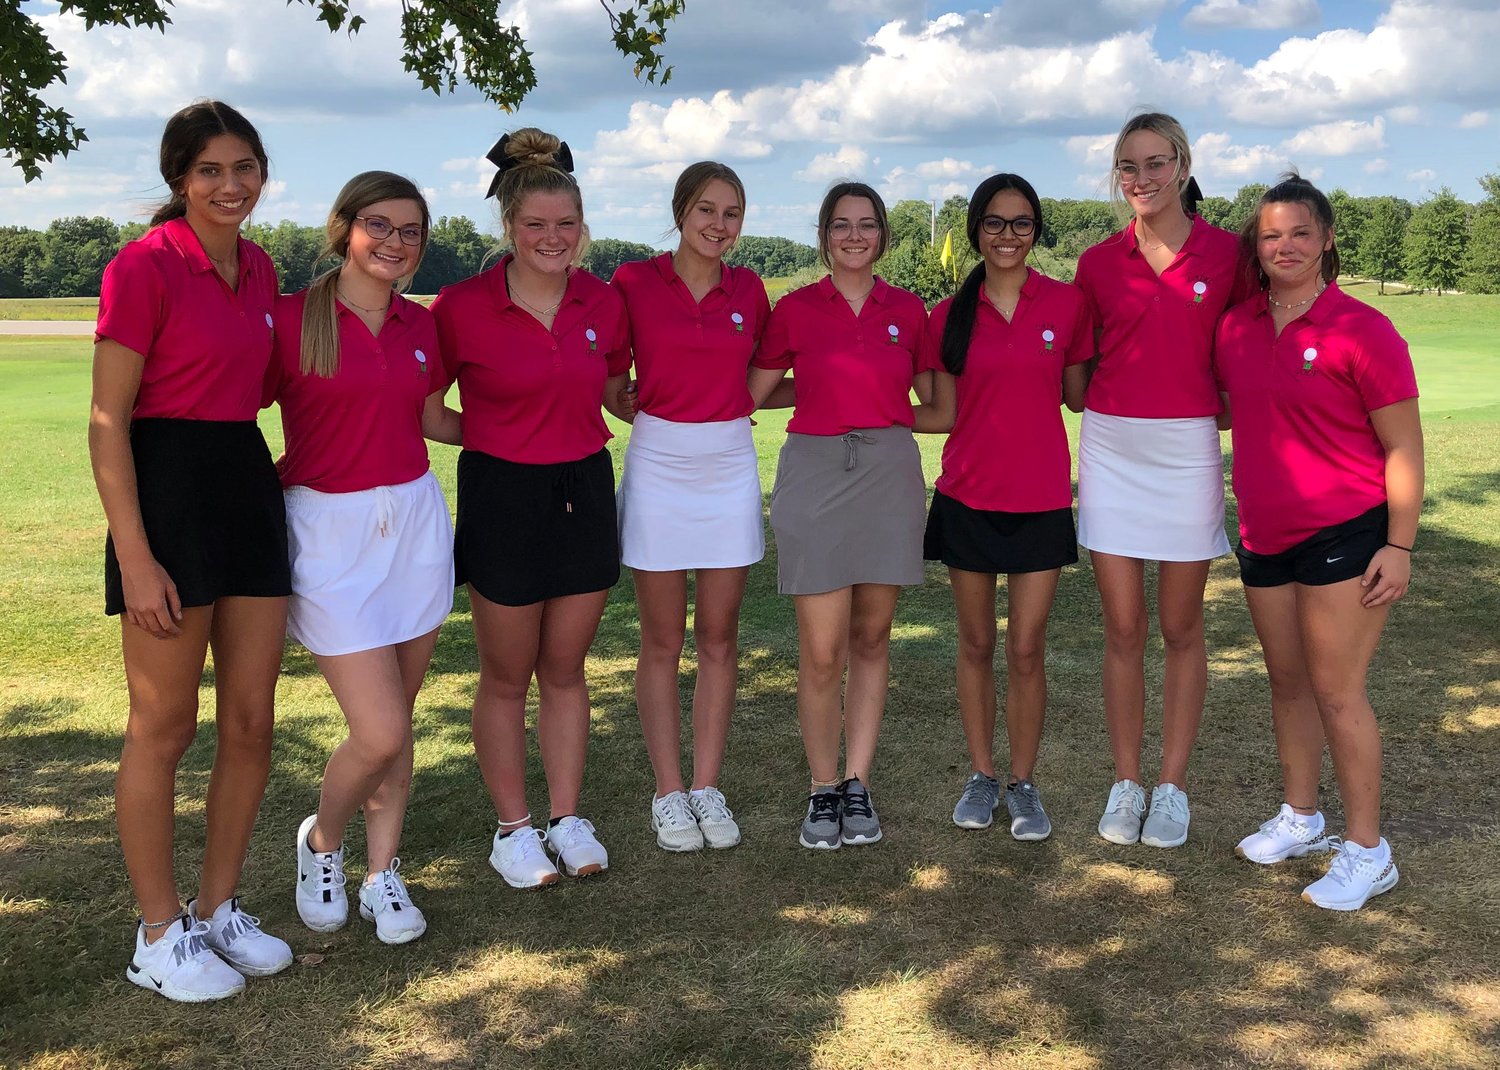 Cairo varsity girls golf team won a triangular match Wednesday, Sept. 1 that was hosted by Paris High School. Emma Alexander and Macie Harman of Cairo tied for medalist honors with a score of 56 on the par-36 course. Cairo golfers shown are (left to right) Journey Sander (JV), Emma Alexander, Avery Martin, Kennedy Kearns, Addison Pollard, Elena Blanchette (JV), Macie Harman and Riley Freitag (JV).